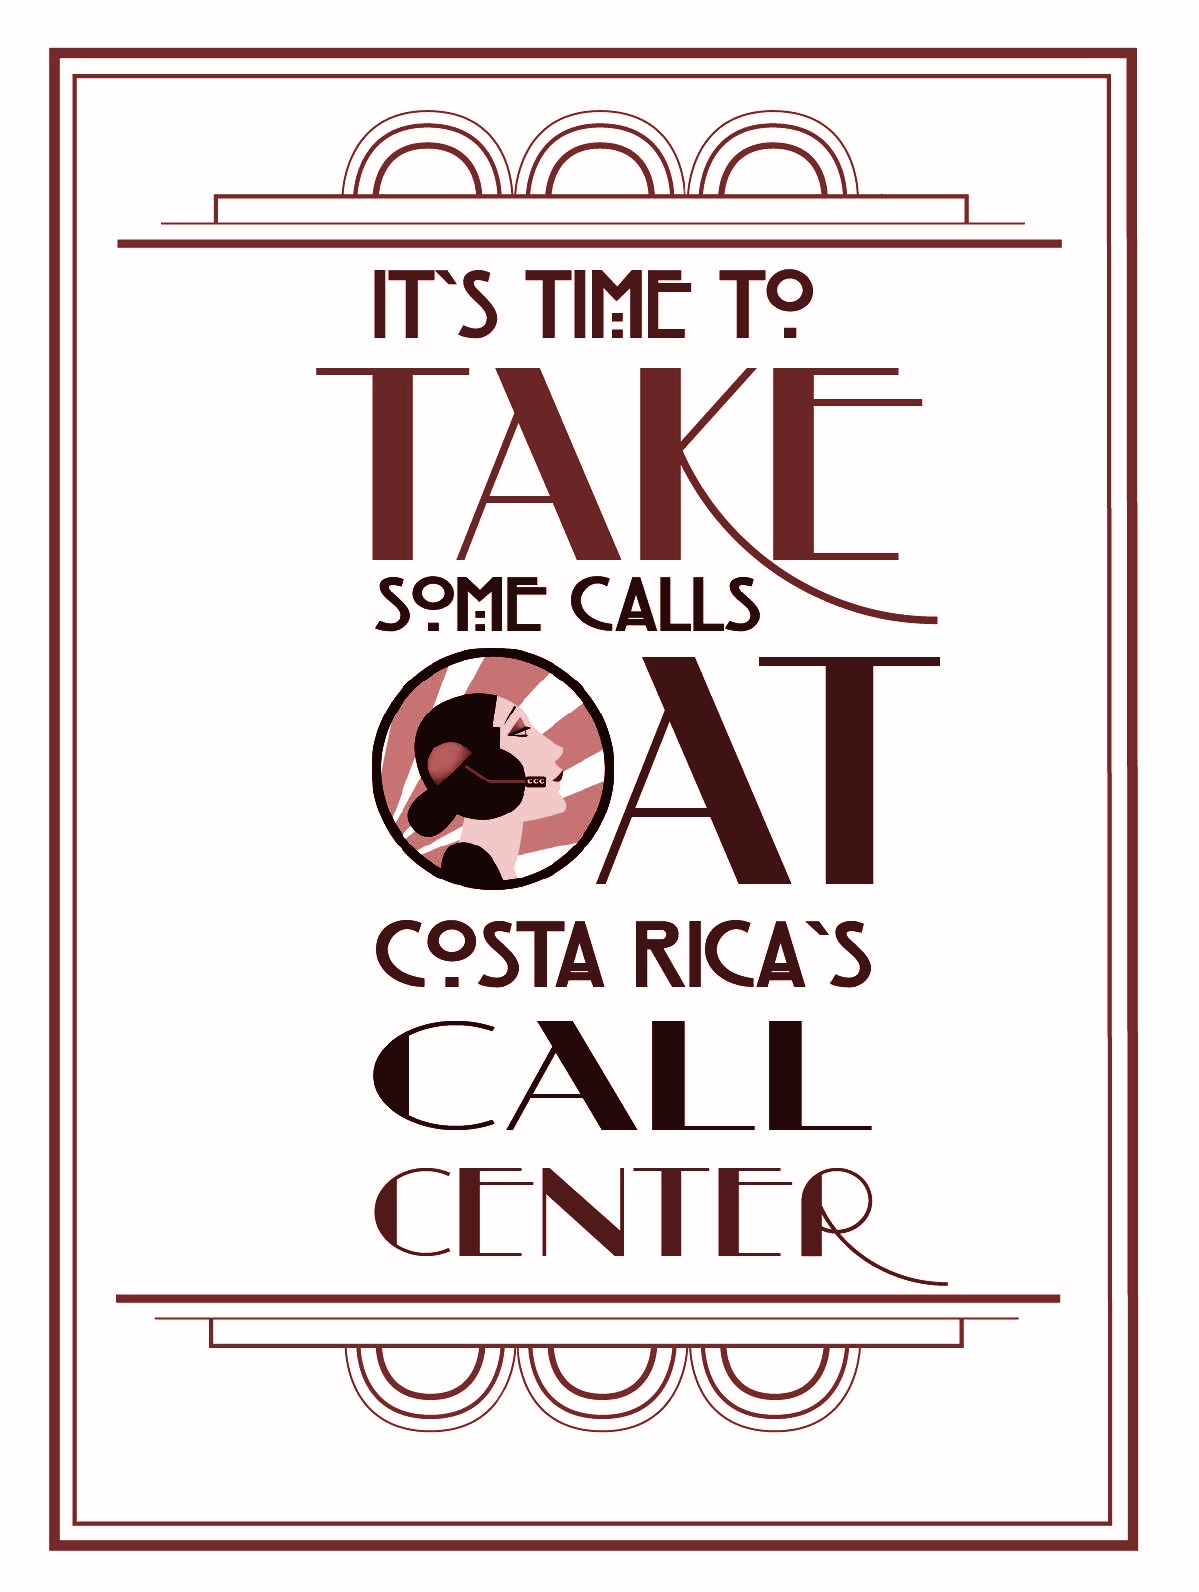 VIRTUAL ASSISTANT AND OFFSHORING COSTA RICA.jpg  by richardblank